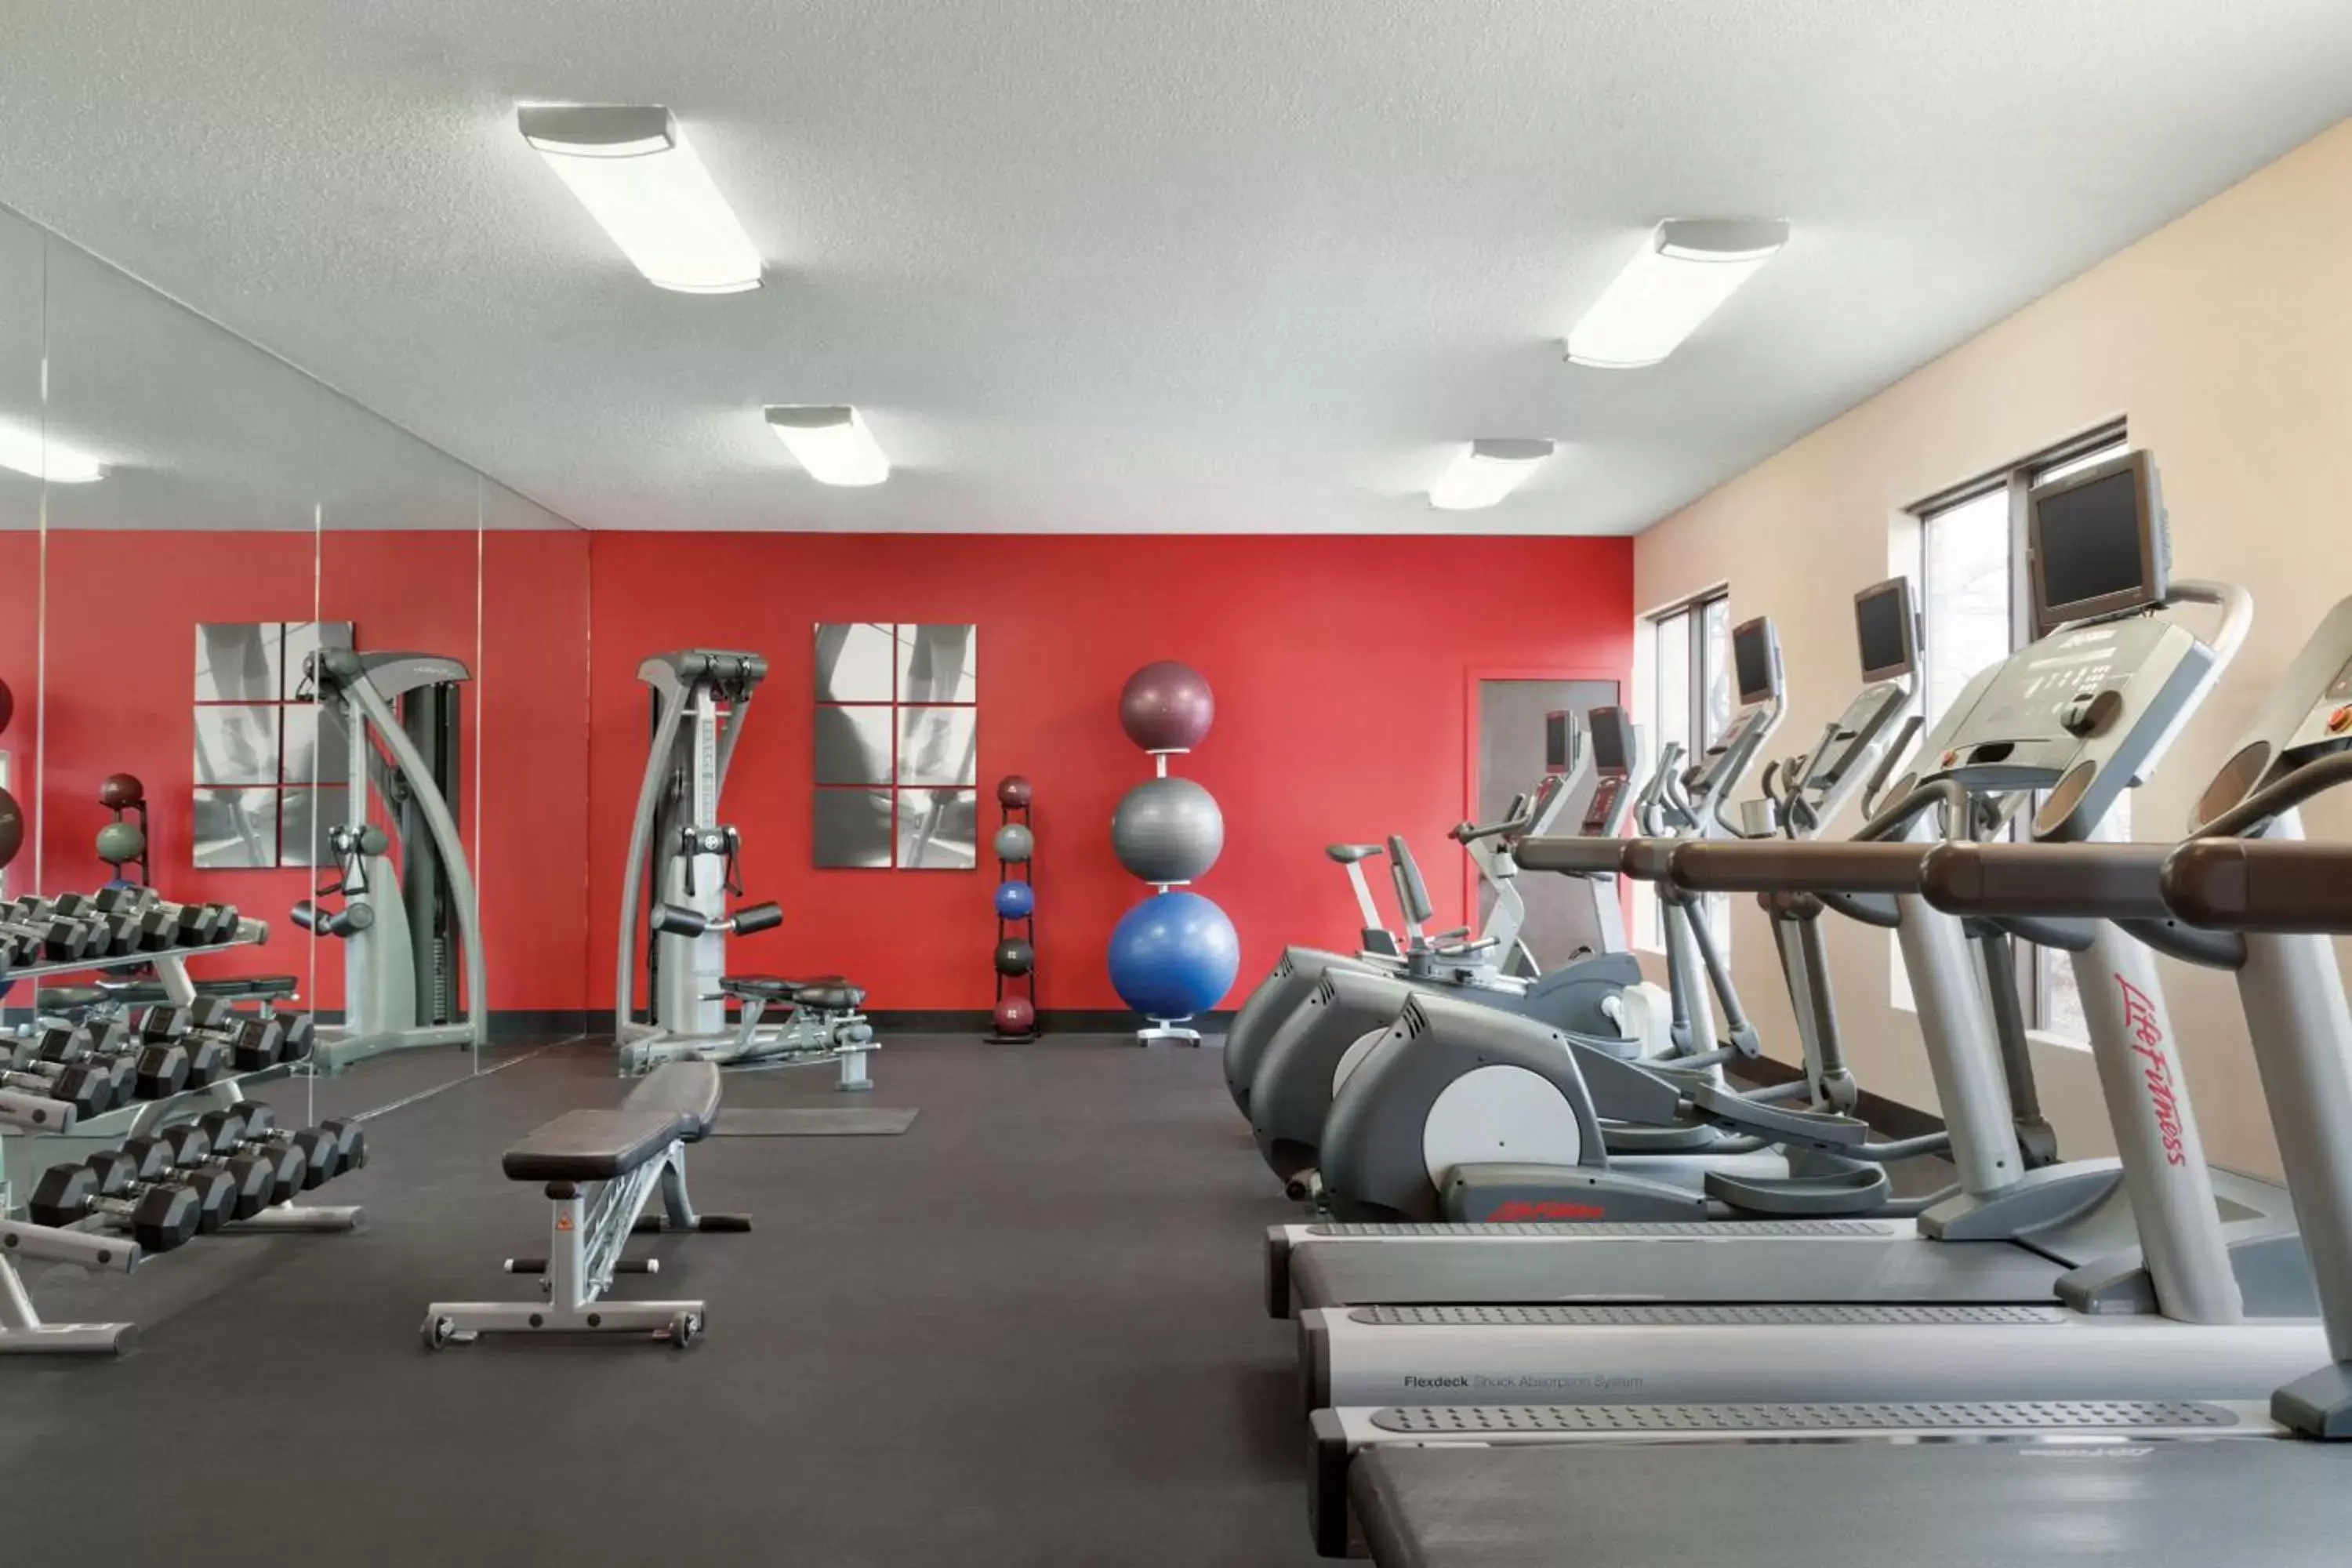 Fitness centre/facilities, Fitness Center/Facilities in Delta Hotels by Marriott Helena Colonial